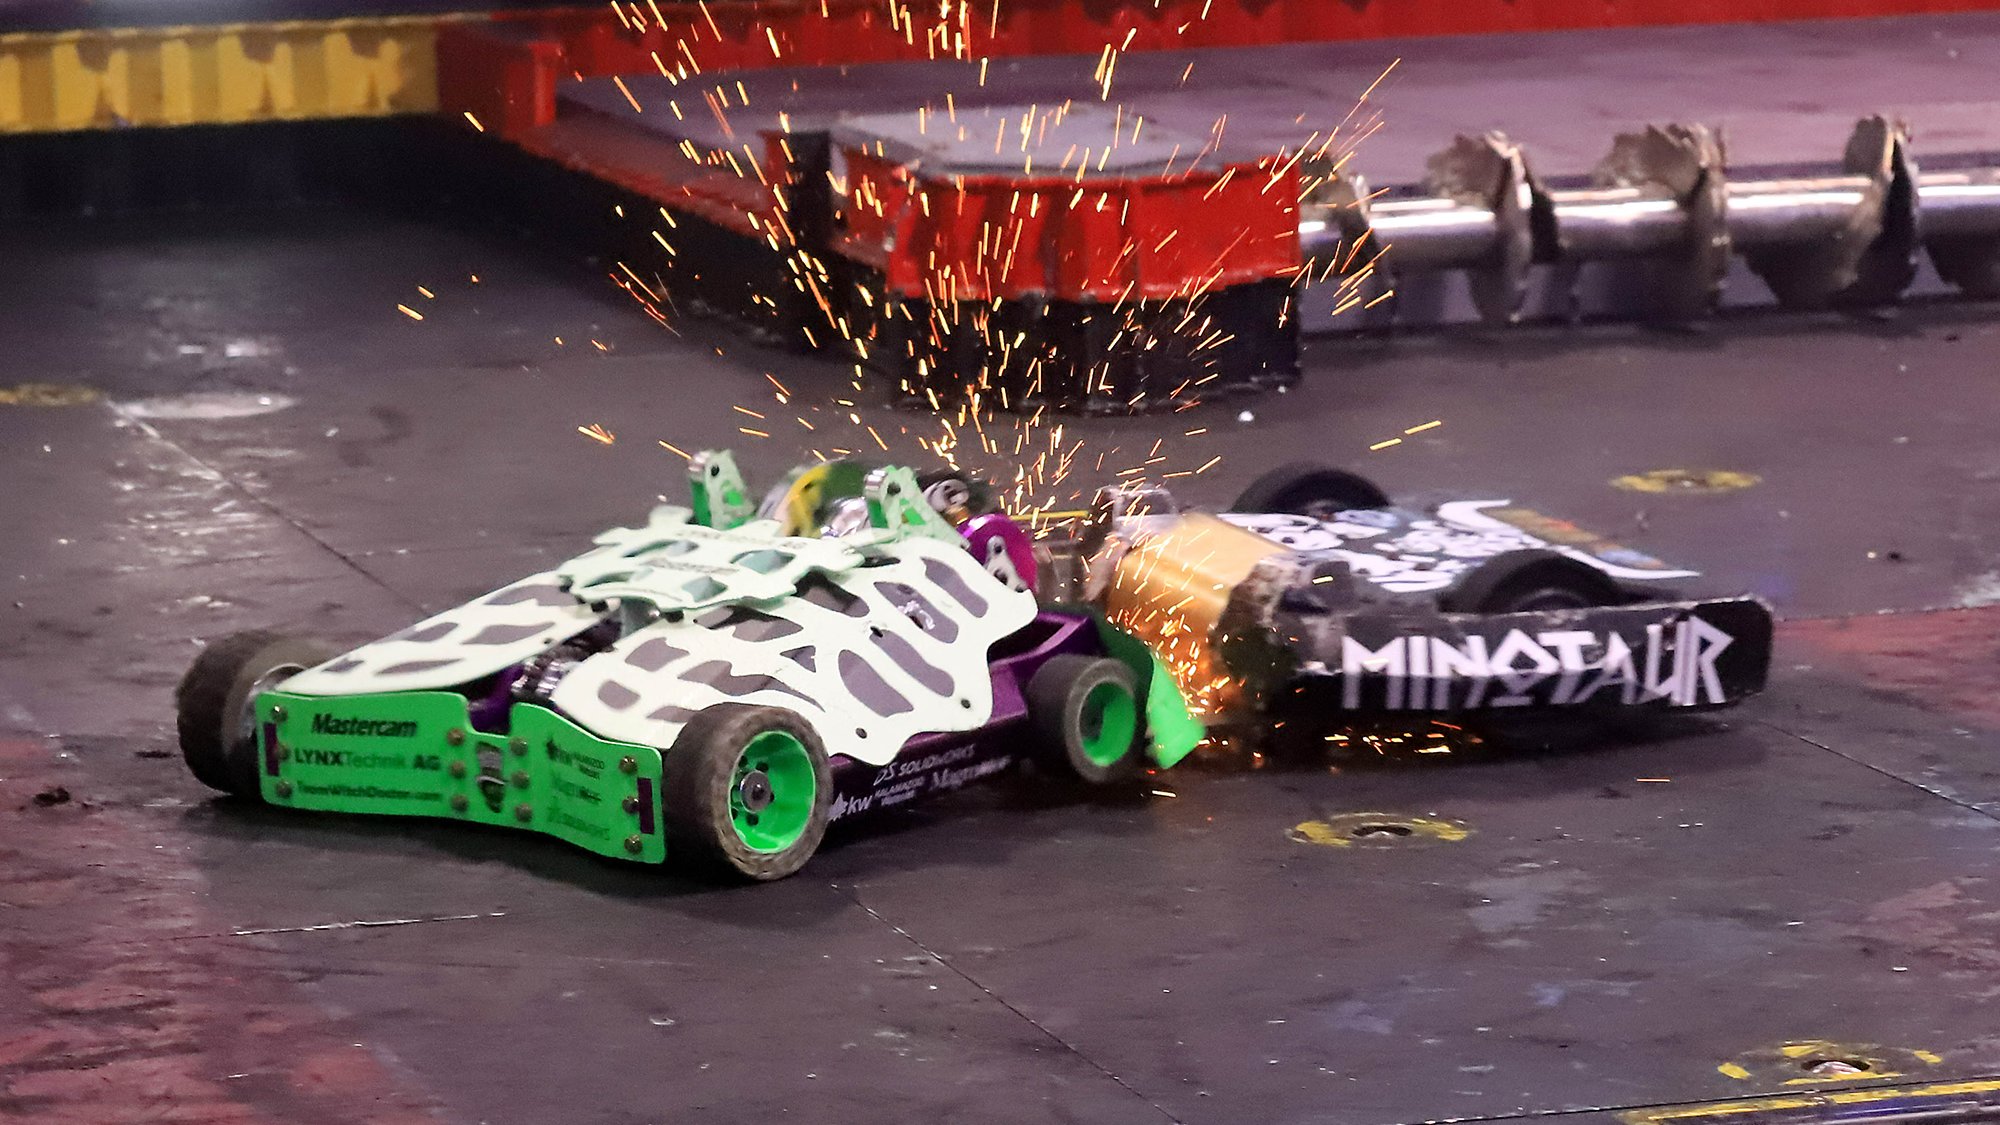 BattleBots Stream FullLength Episodes On Discovery